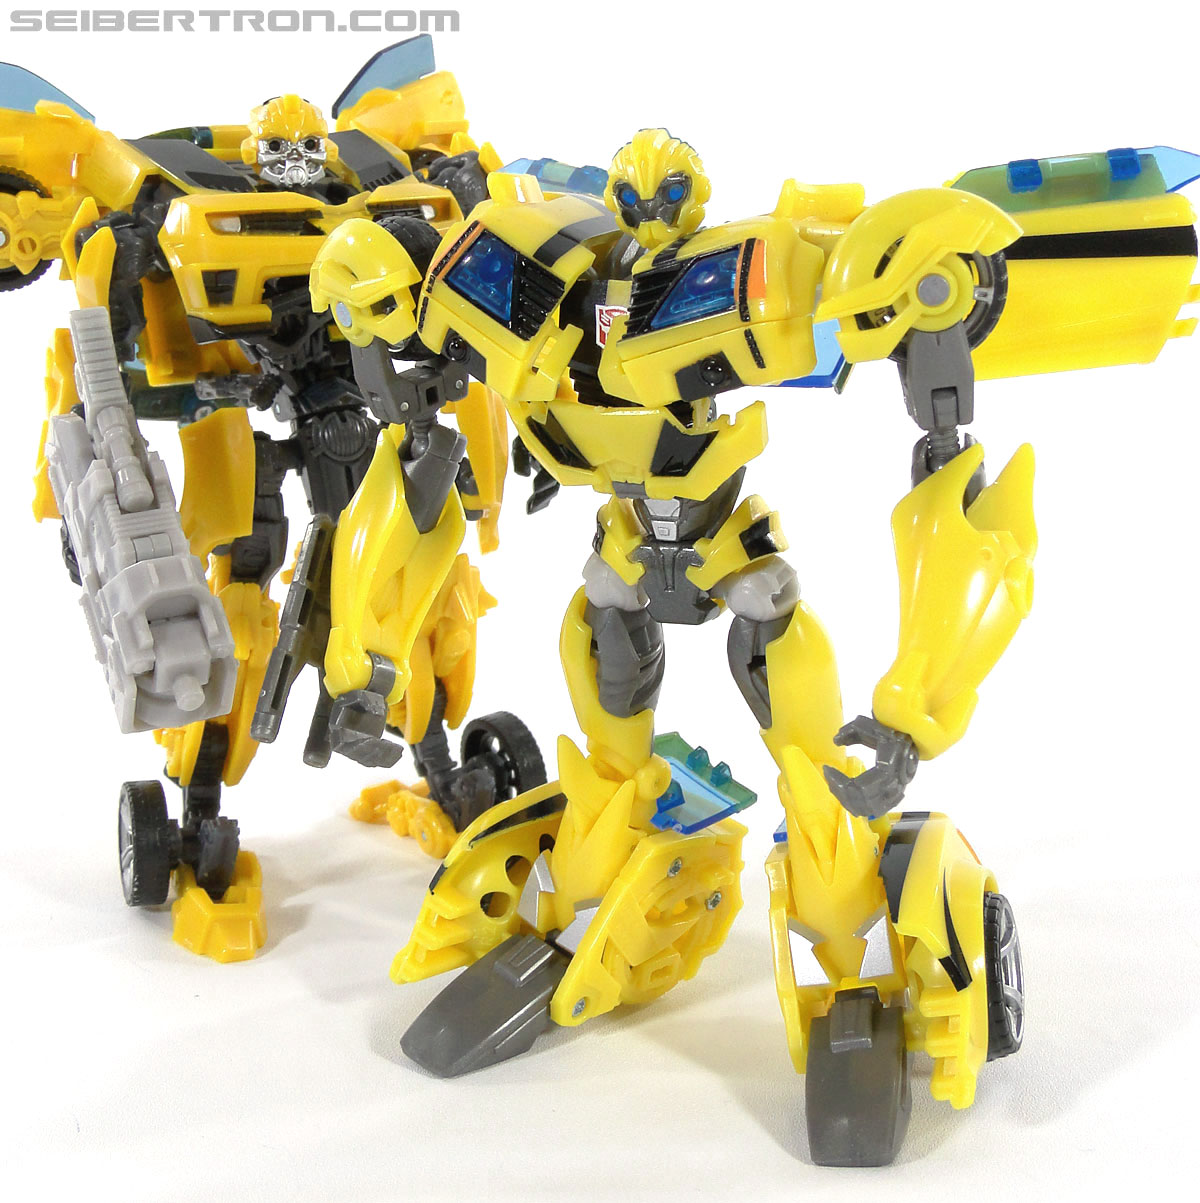 Transformers Prime: First Edition Bumblebee (Image #130 of 130)